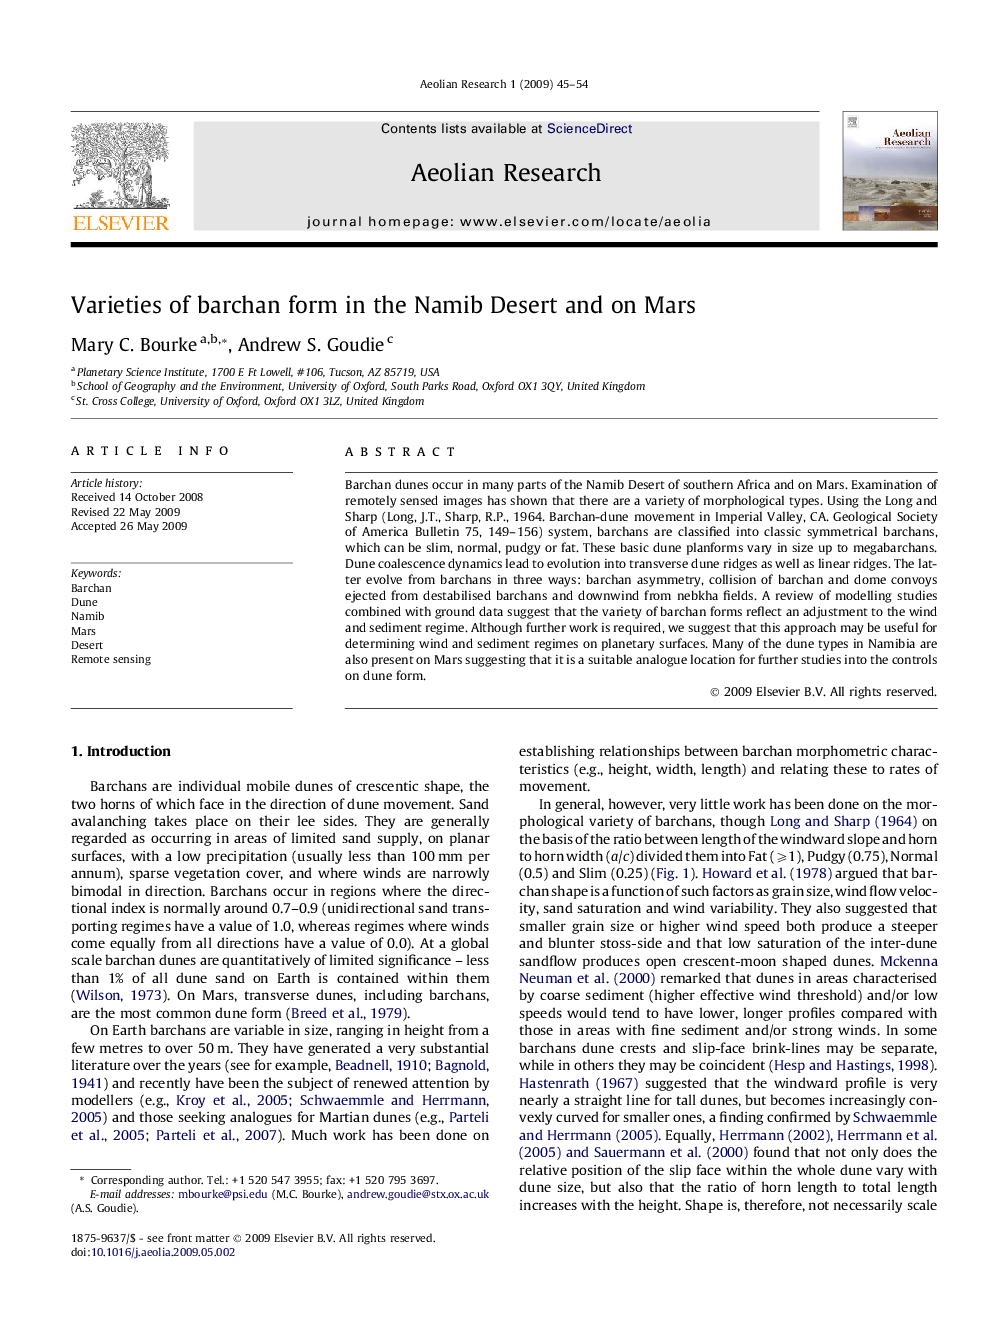 Varieties of barchan form in the Namib Desert and on Mars